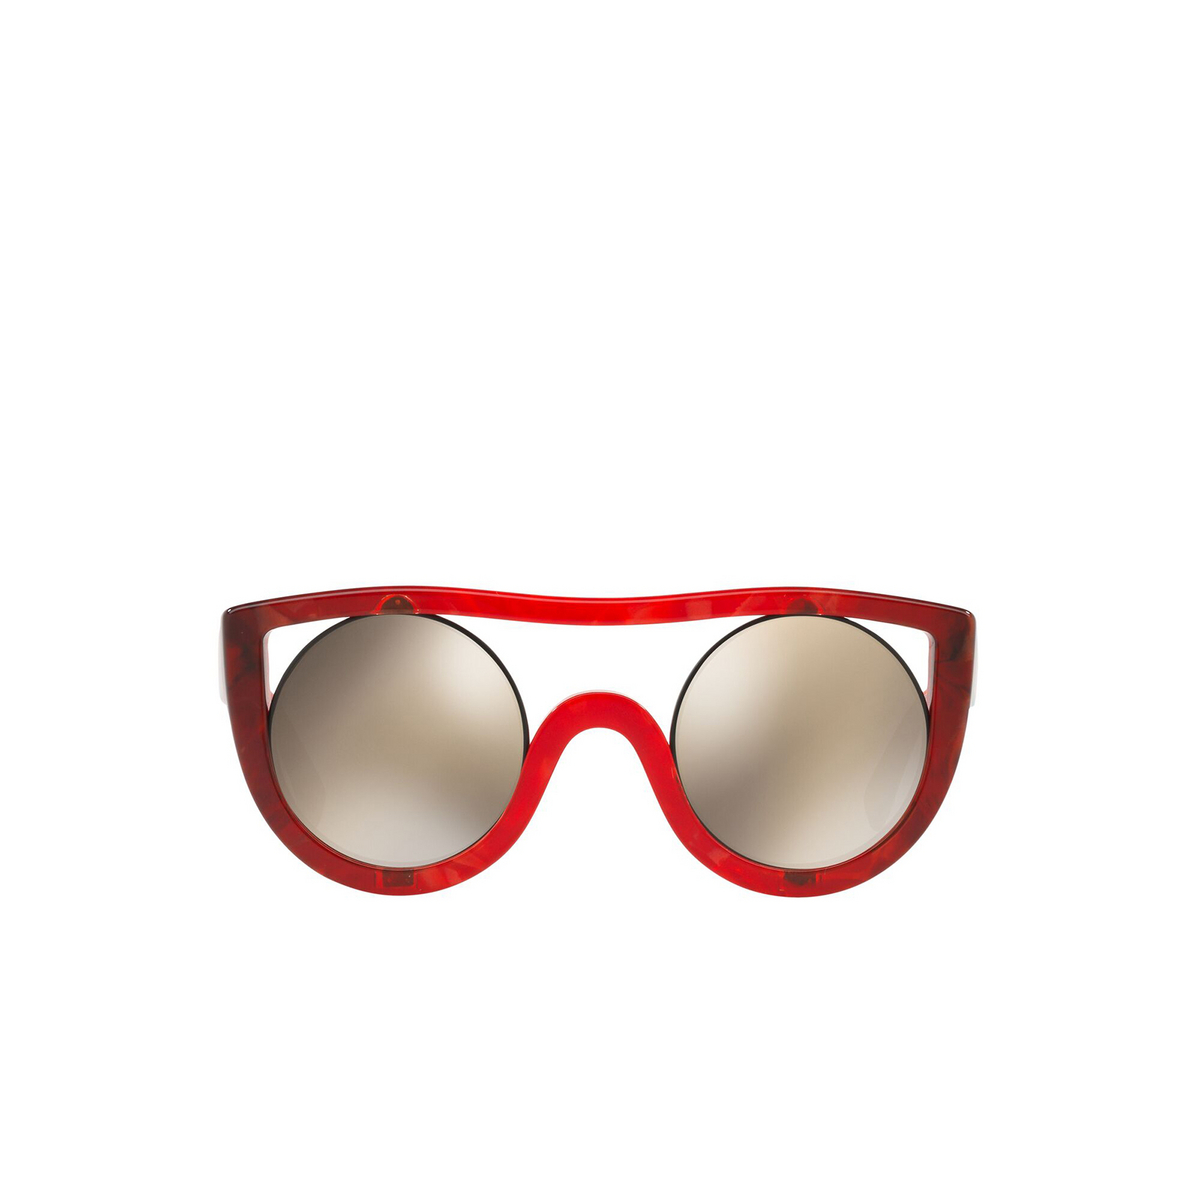 Alain Mikli® Irregular Sunglasses: Ayer A05034 color Red Grey 002/6G - front view.